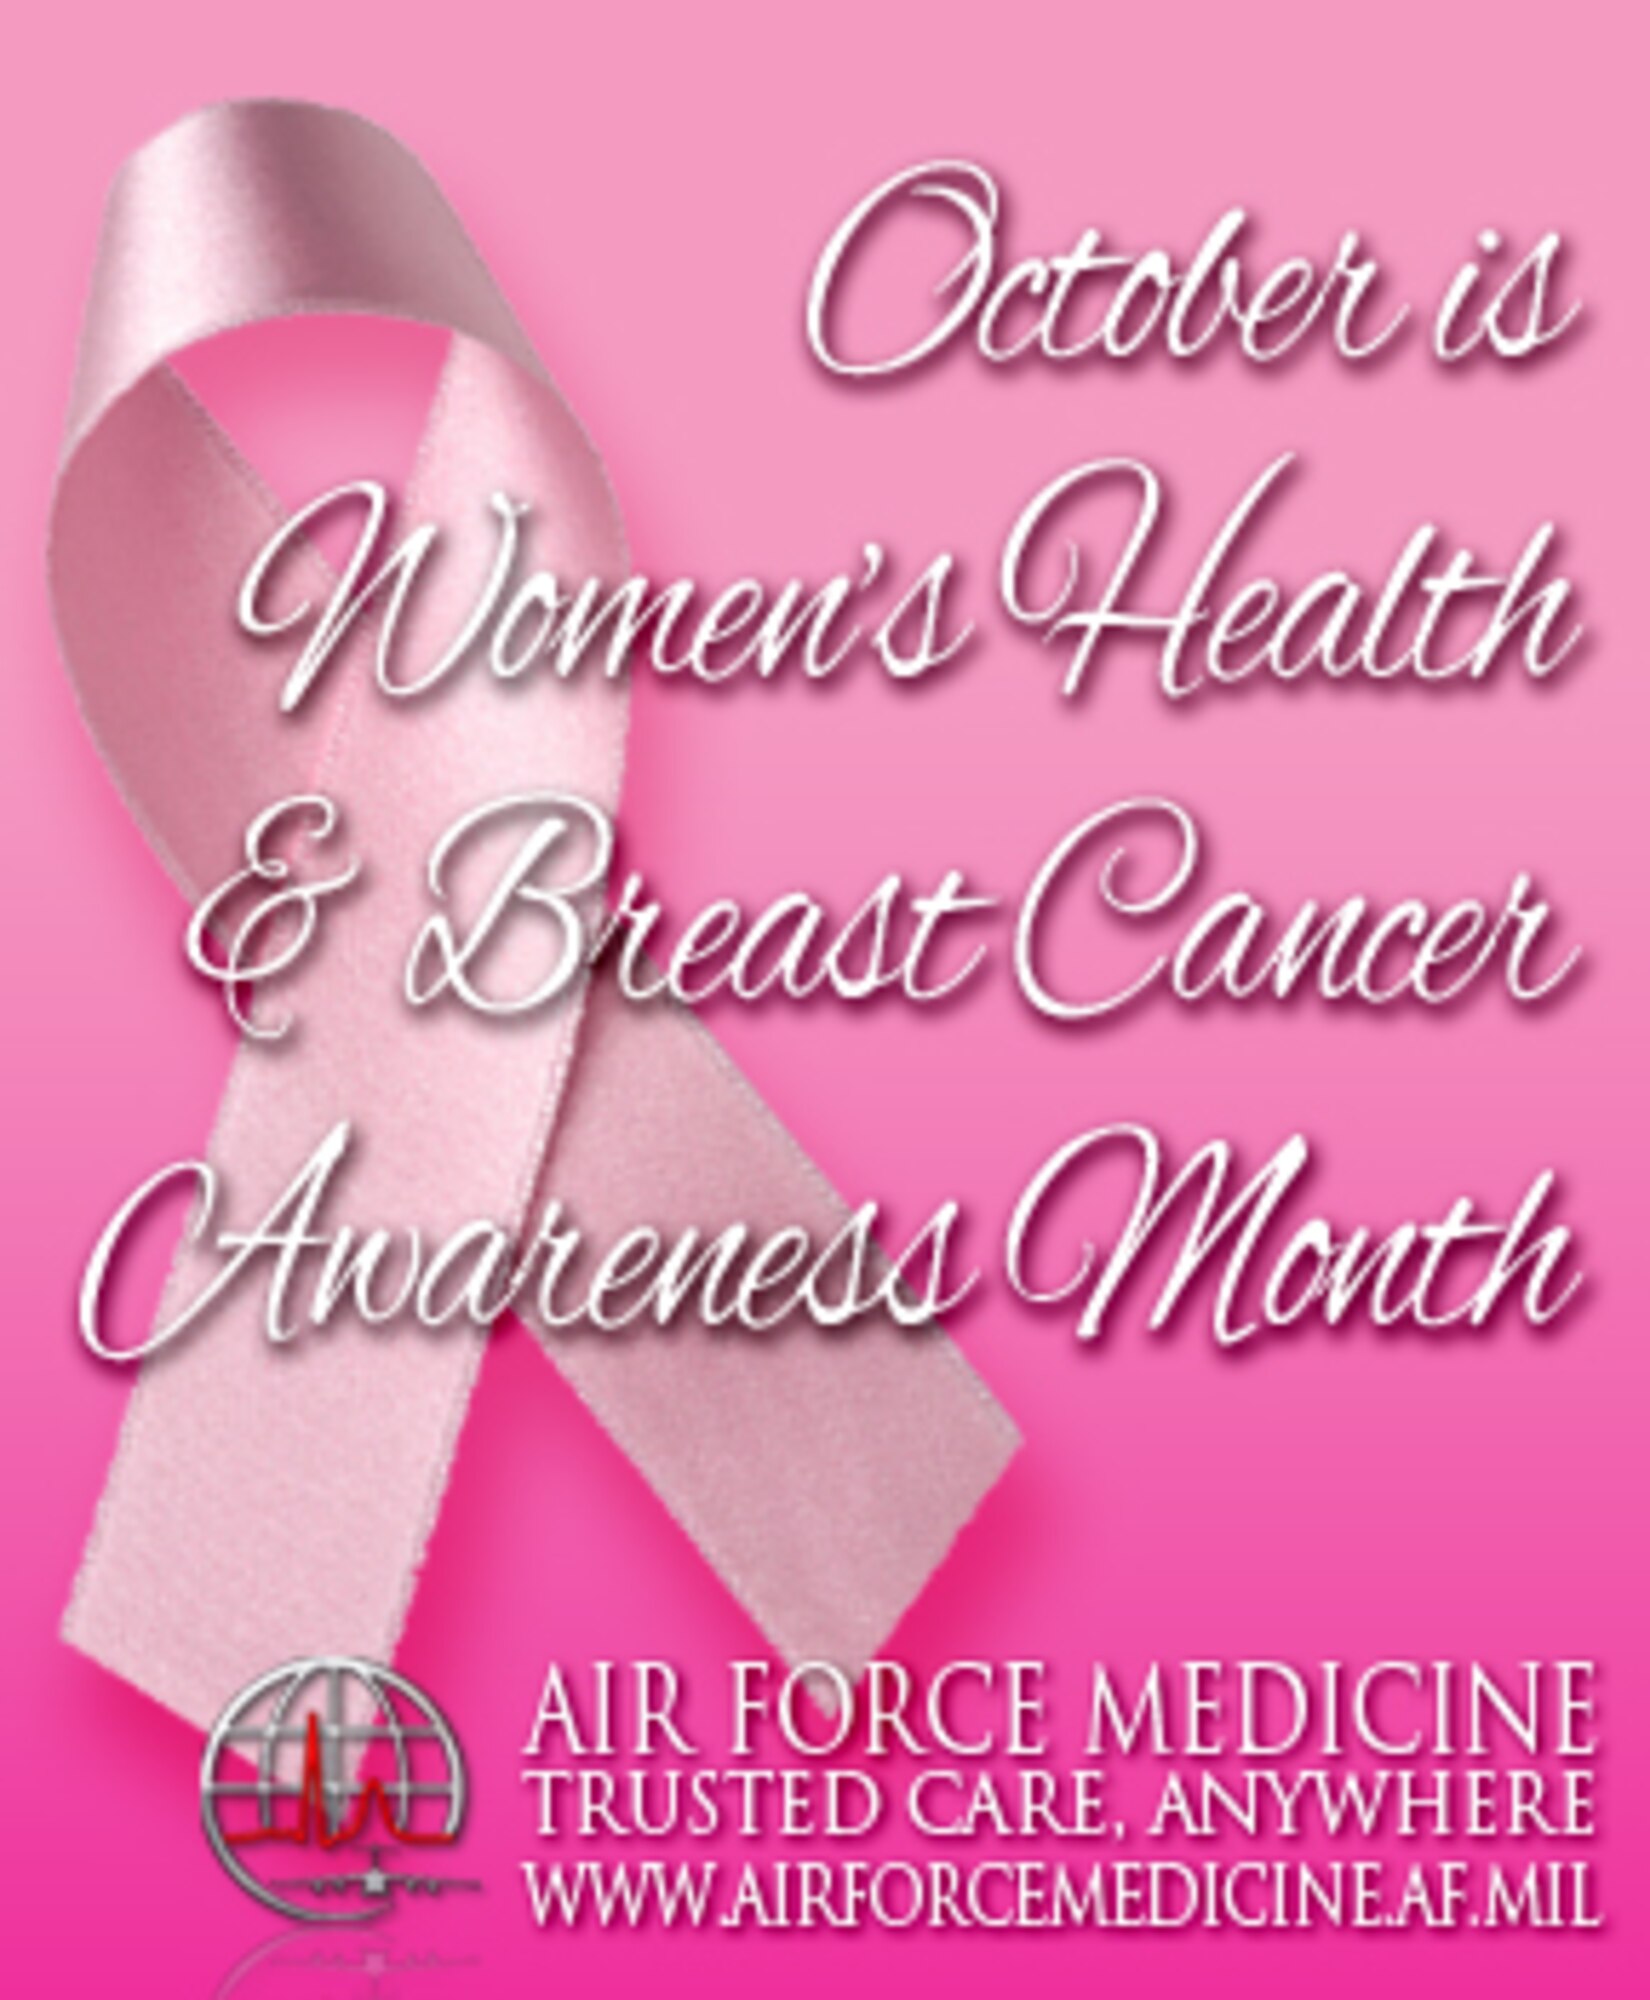 October is Breast Cancer Awareness month. According to the World Health Organization, breast cancer is the most common cancer among women worldwide, claiming the lives of hundreds of thousands of women each year and affecting countries at all levels of modernization.  (Courtesy photo)